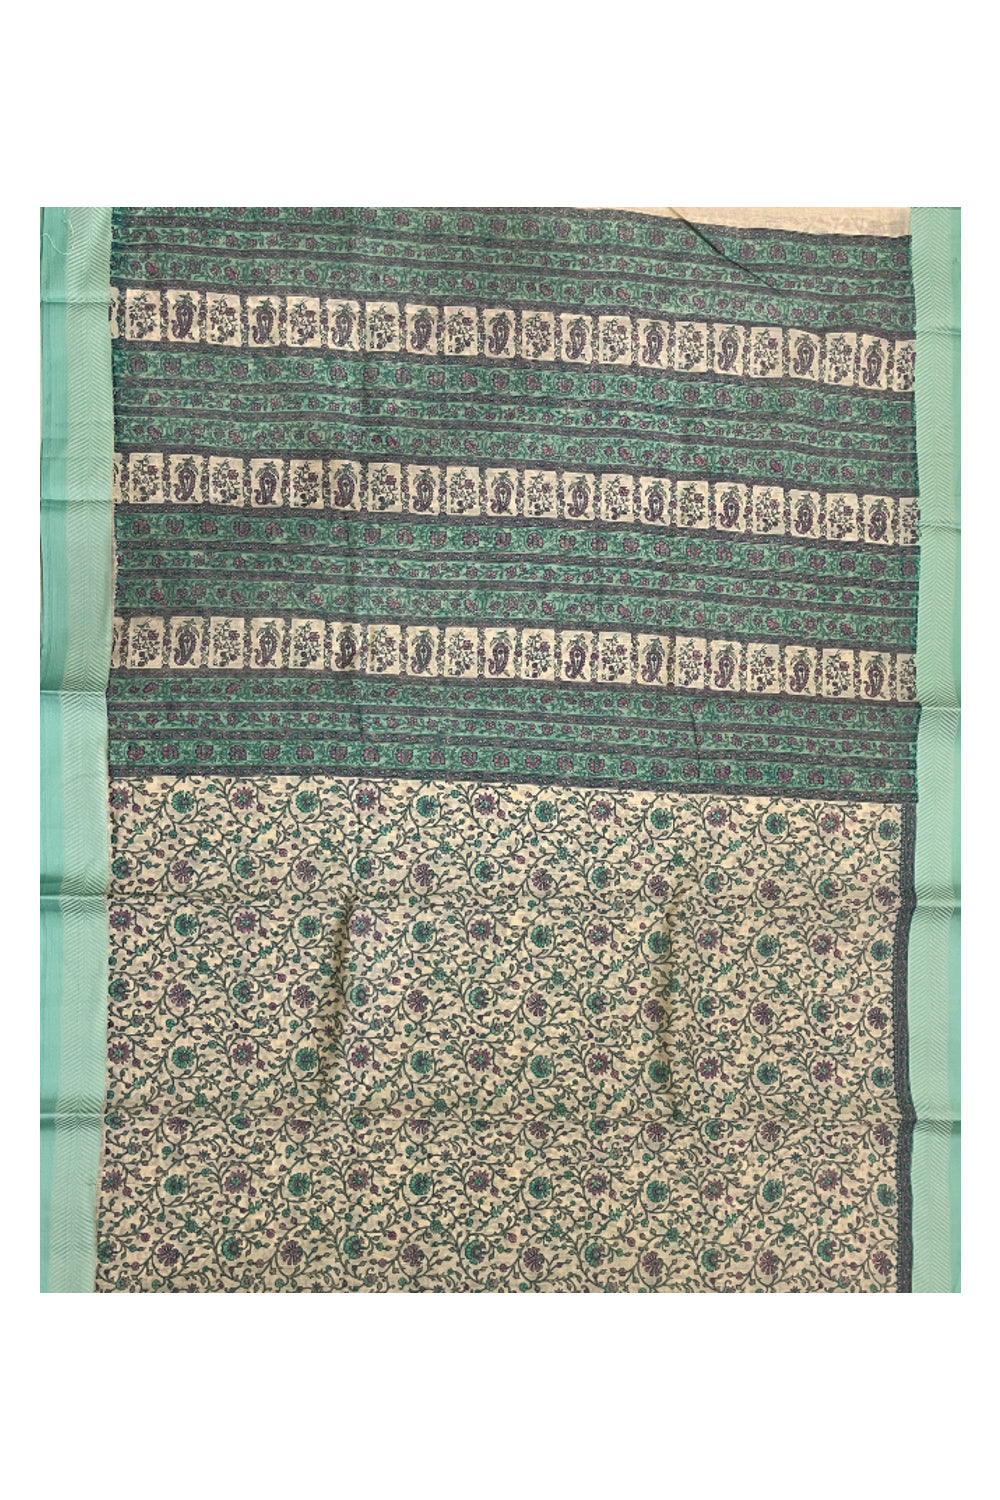 Southloom Cotton Floral Printed Saree with Green Border